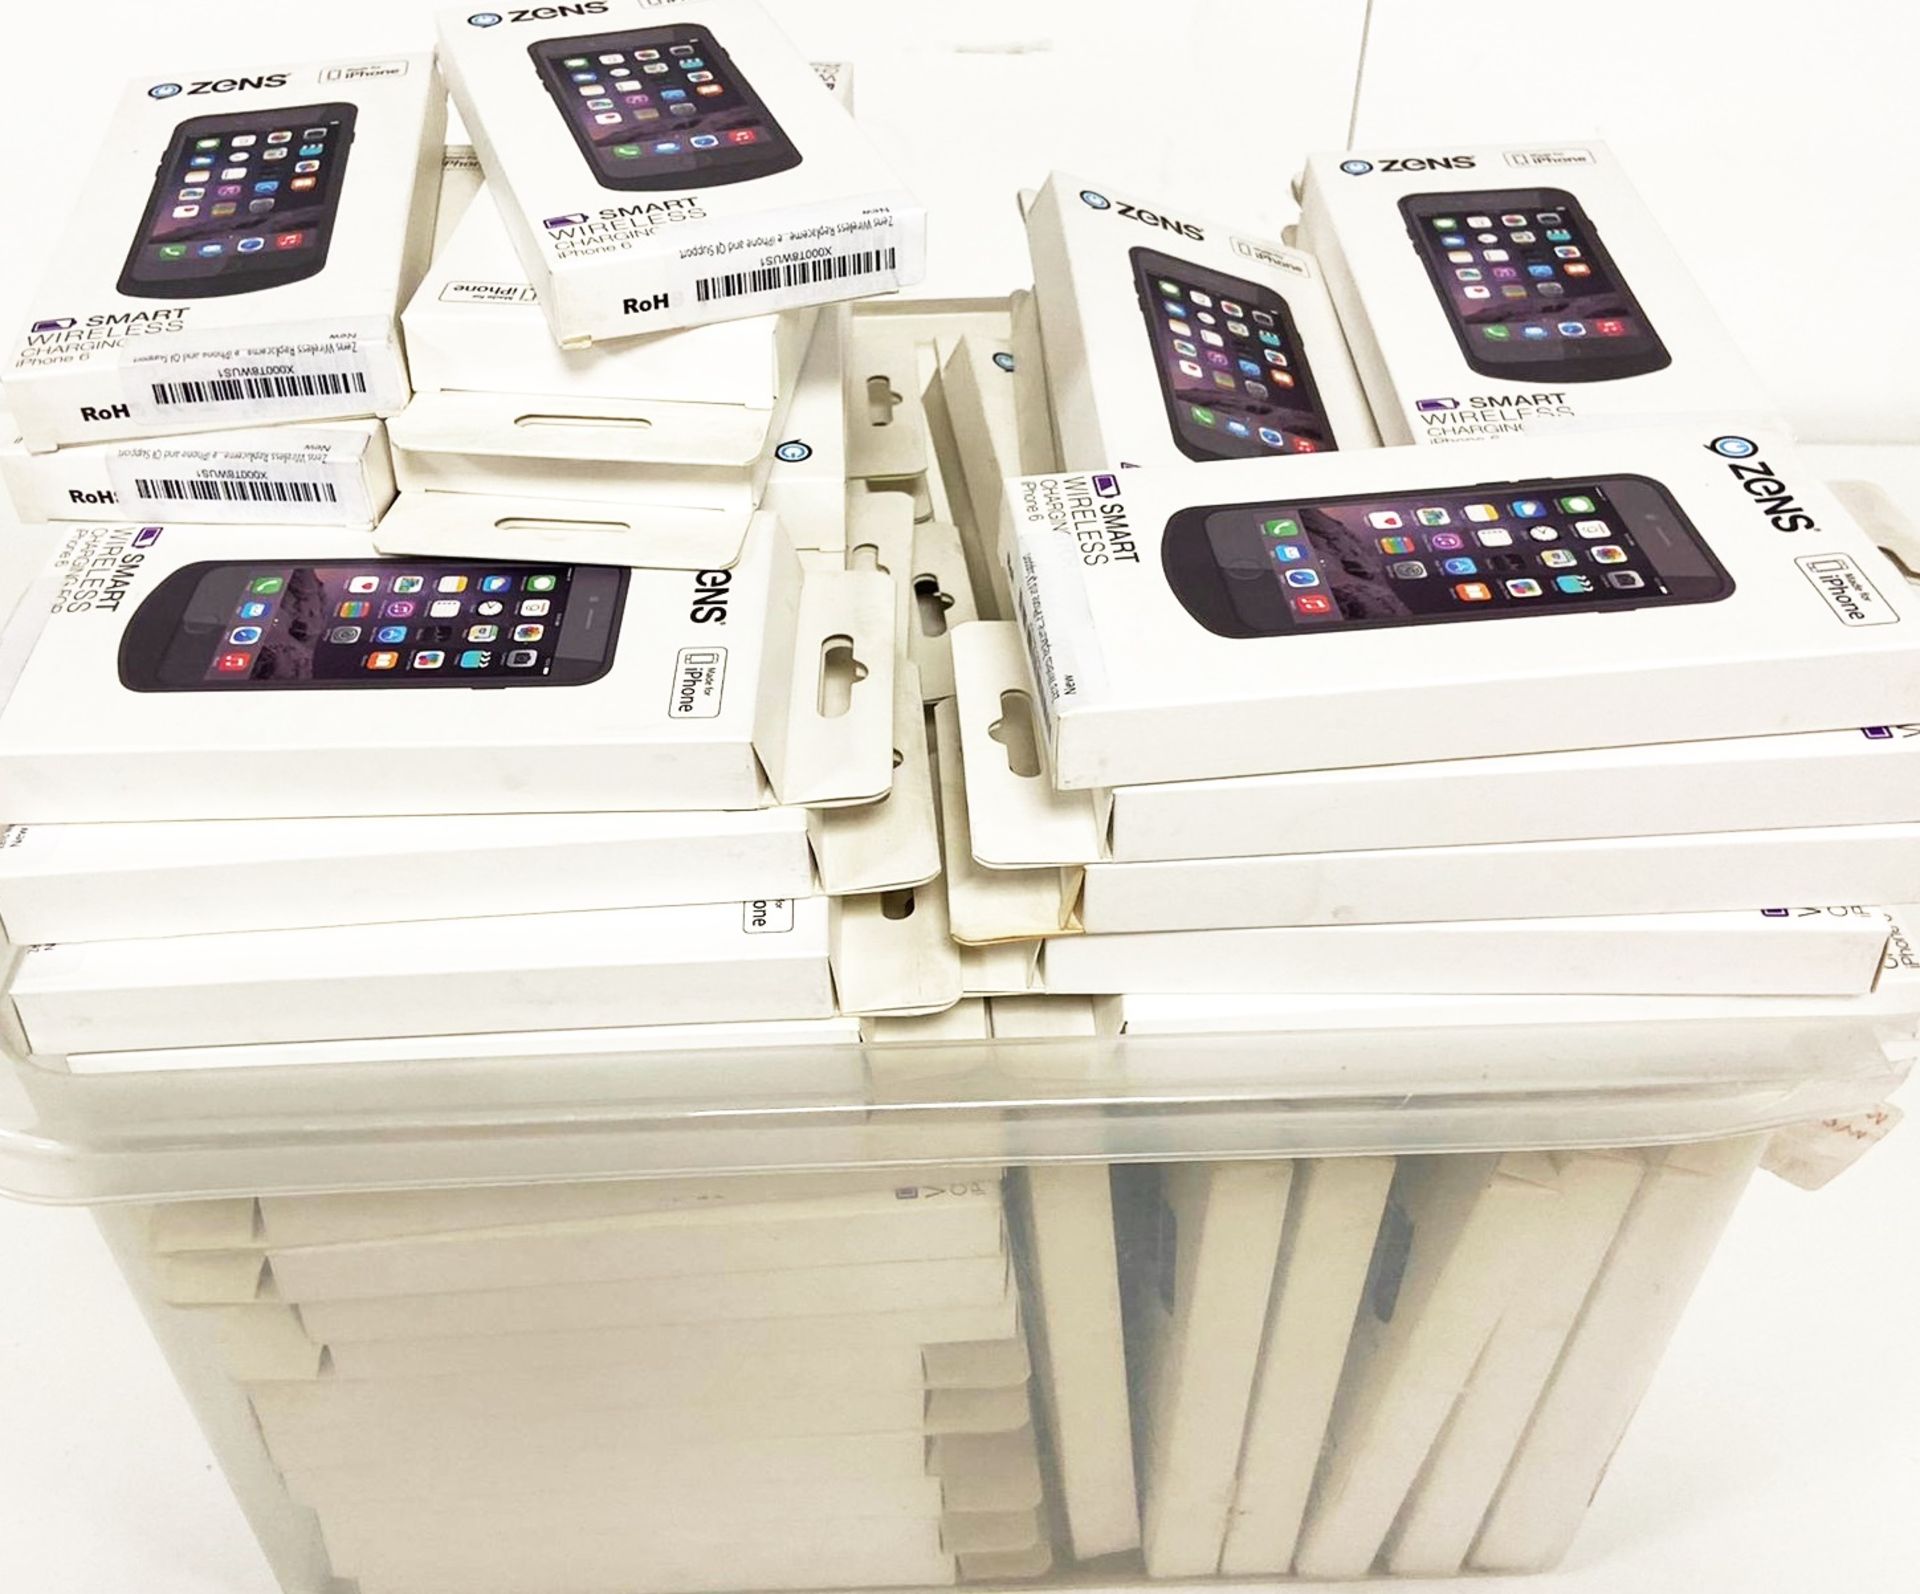 100 x ZENS Smart Wireless Charging Cases For iPhone 6 - Image 2 of 5